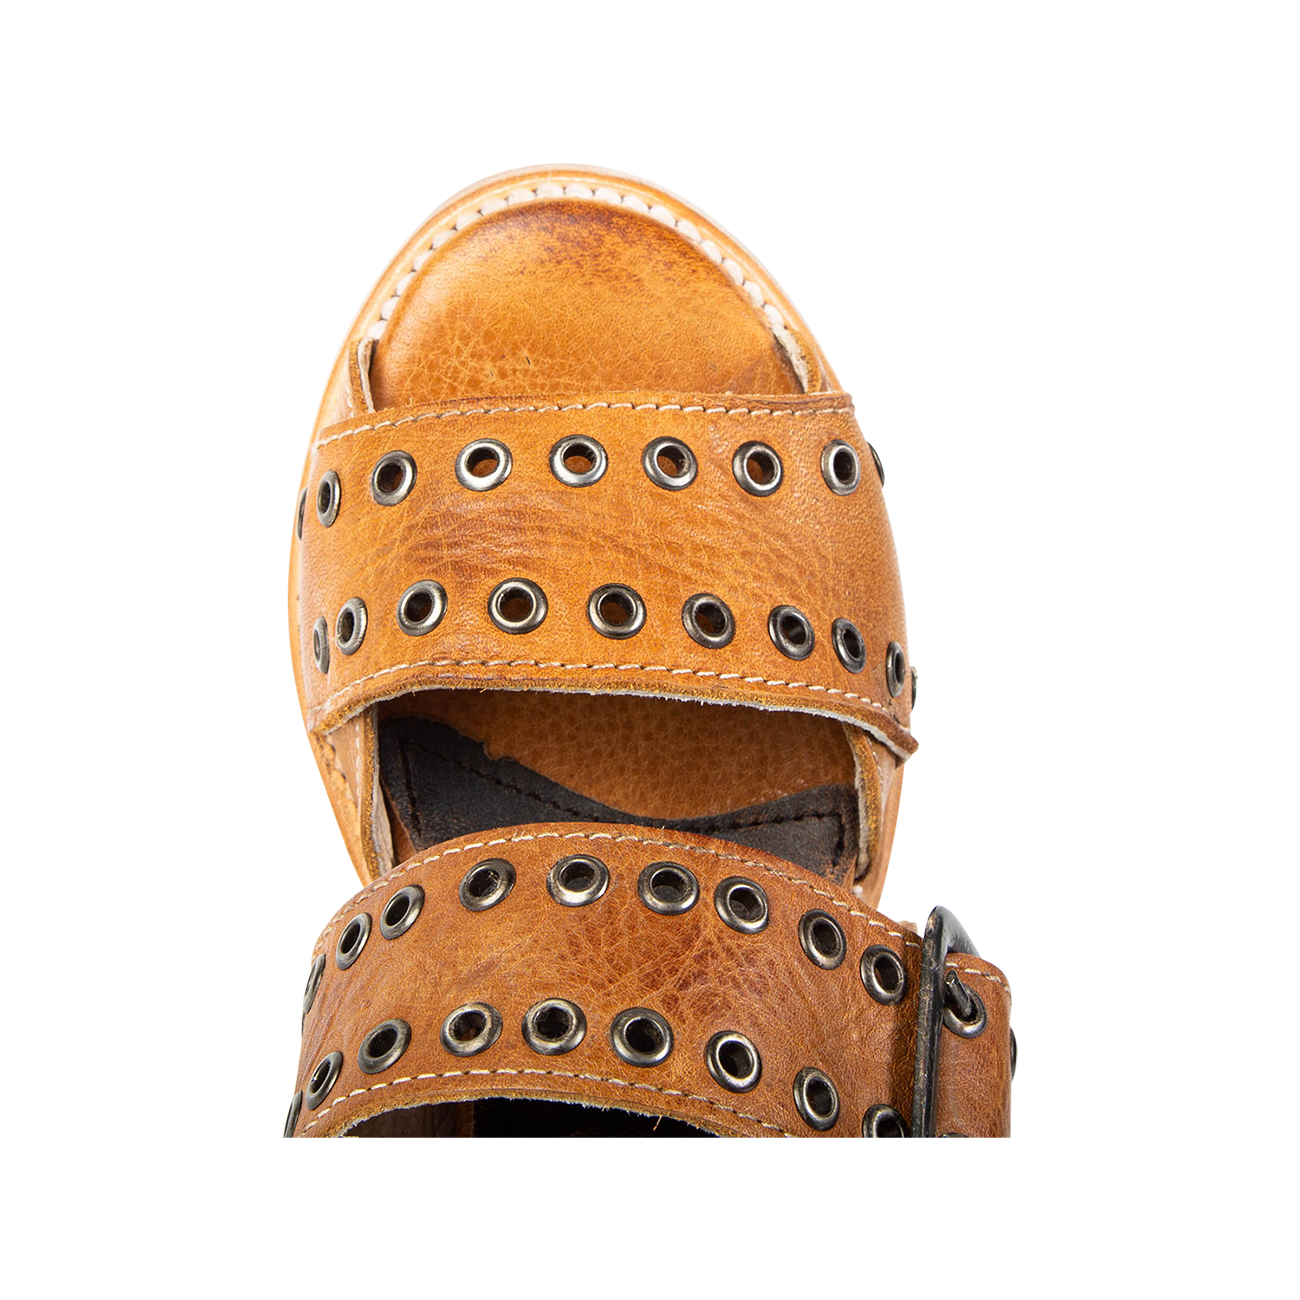 Top view showing round toe and metal buckles on FREEBIRD women's Blake wheat sandal